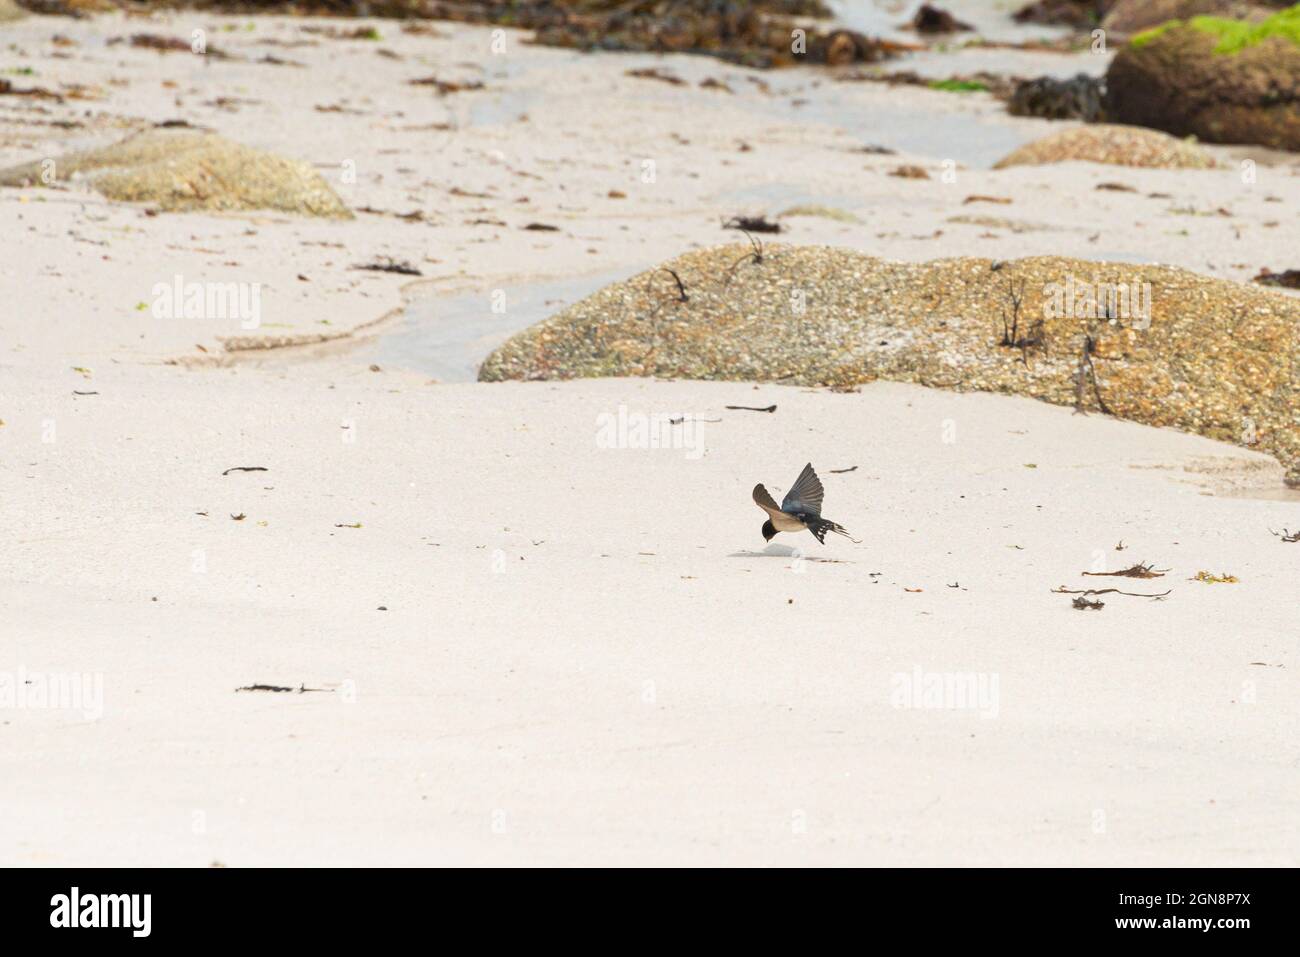 A swallow (Hirundo rustica) flying low over a beach catching food Stock Photo